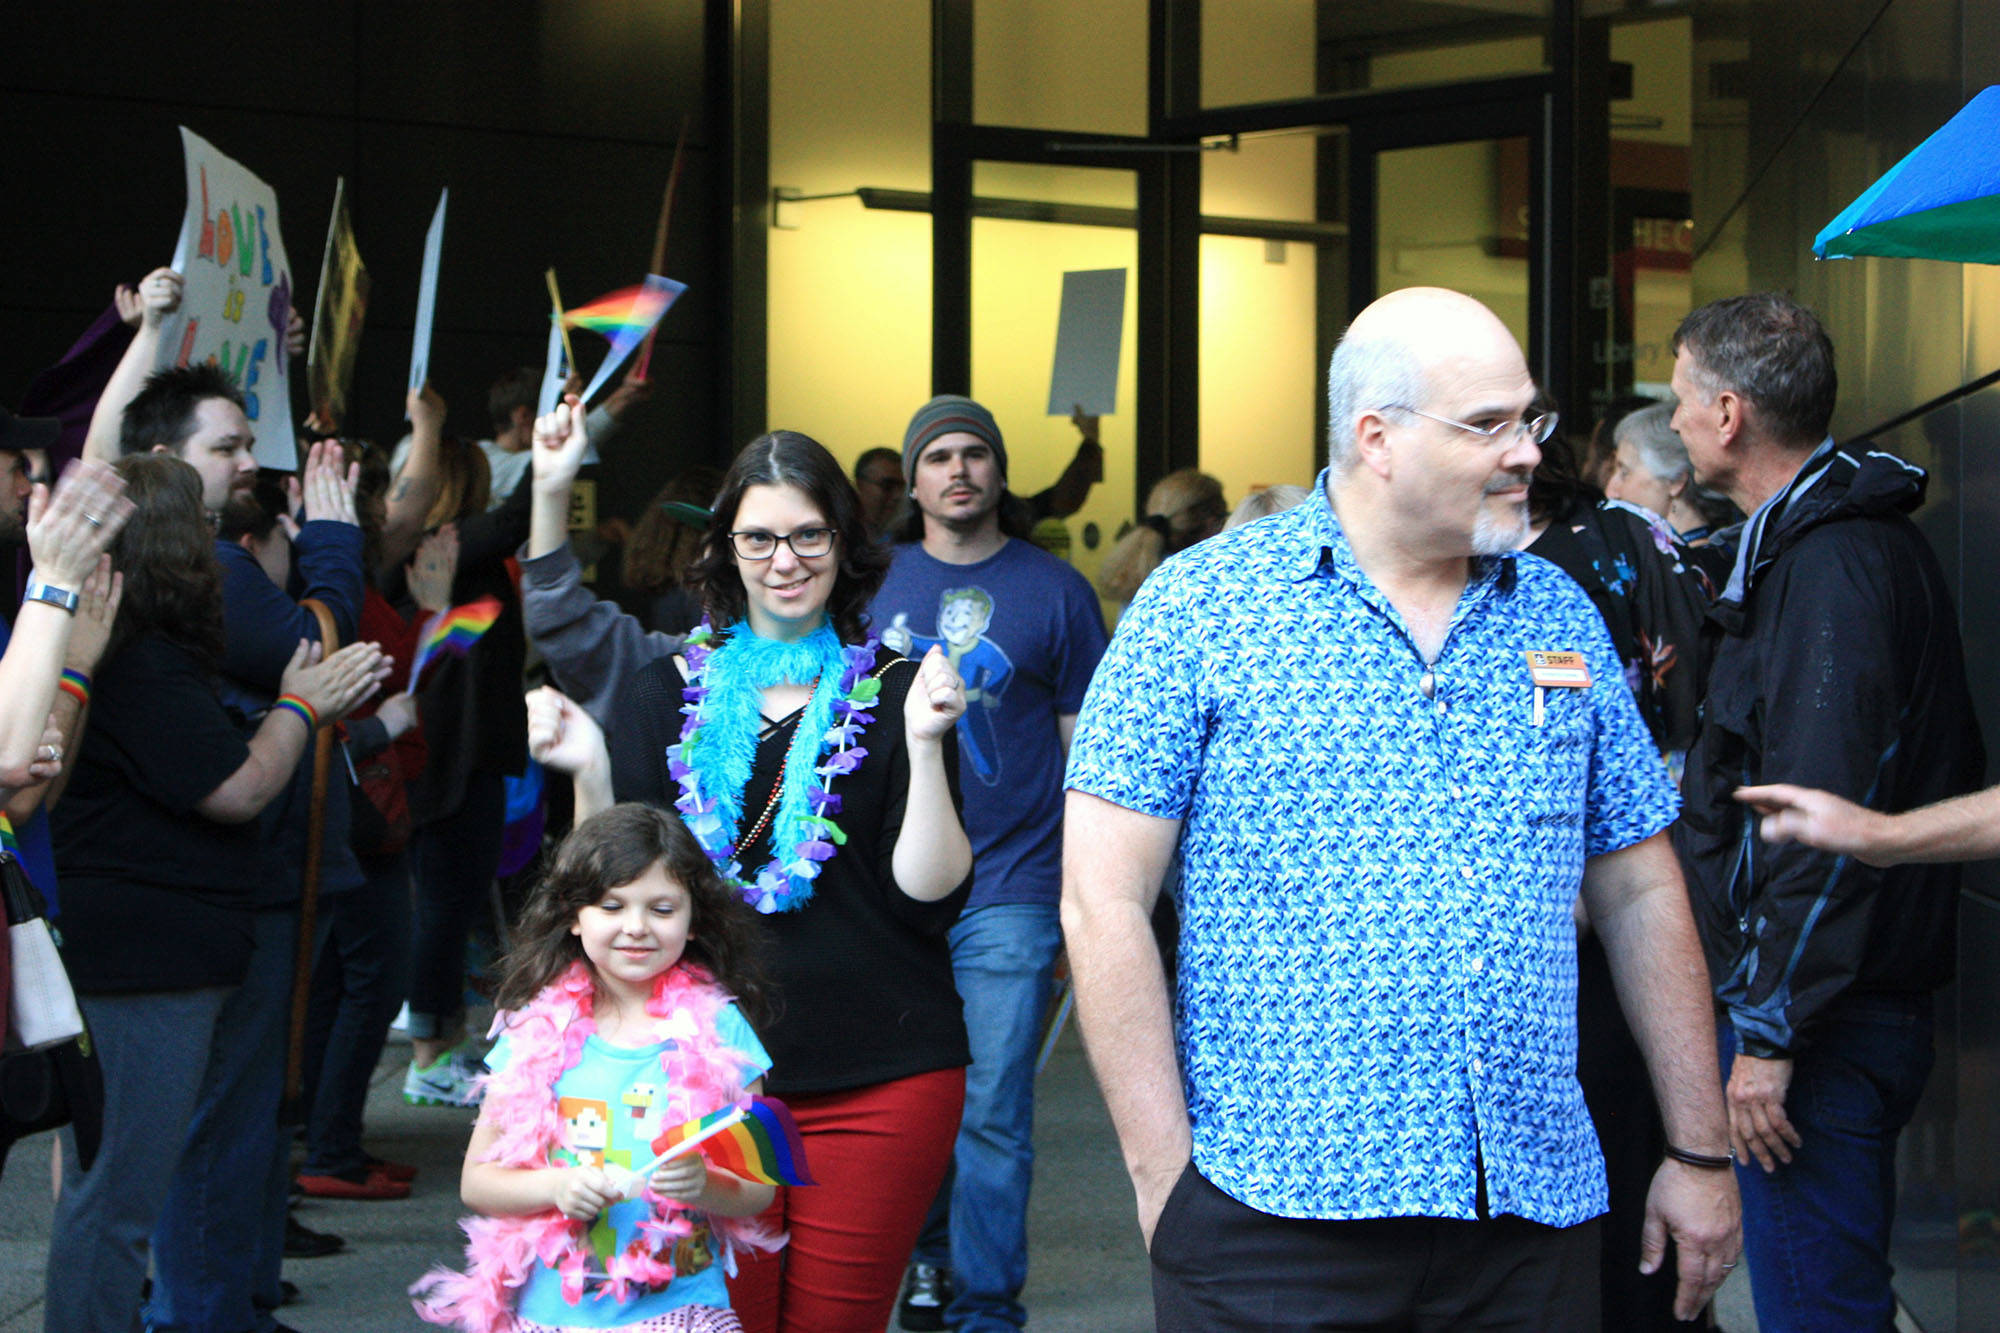 Attendees of the Drag Queen Story Hour at the Fairwood Library exit the event. A walkway was held open for them by supporters while protesters held signs condemning the event behind them. Aaron Kunkler/staff photo